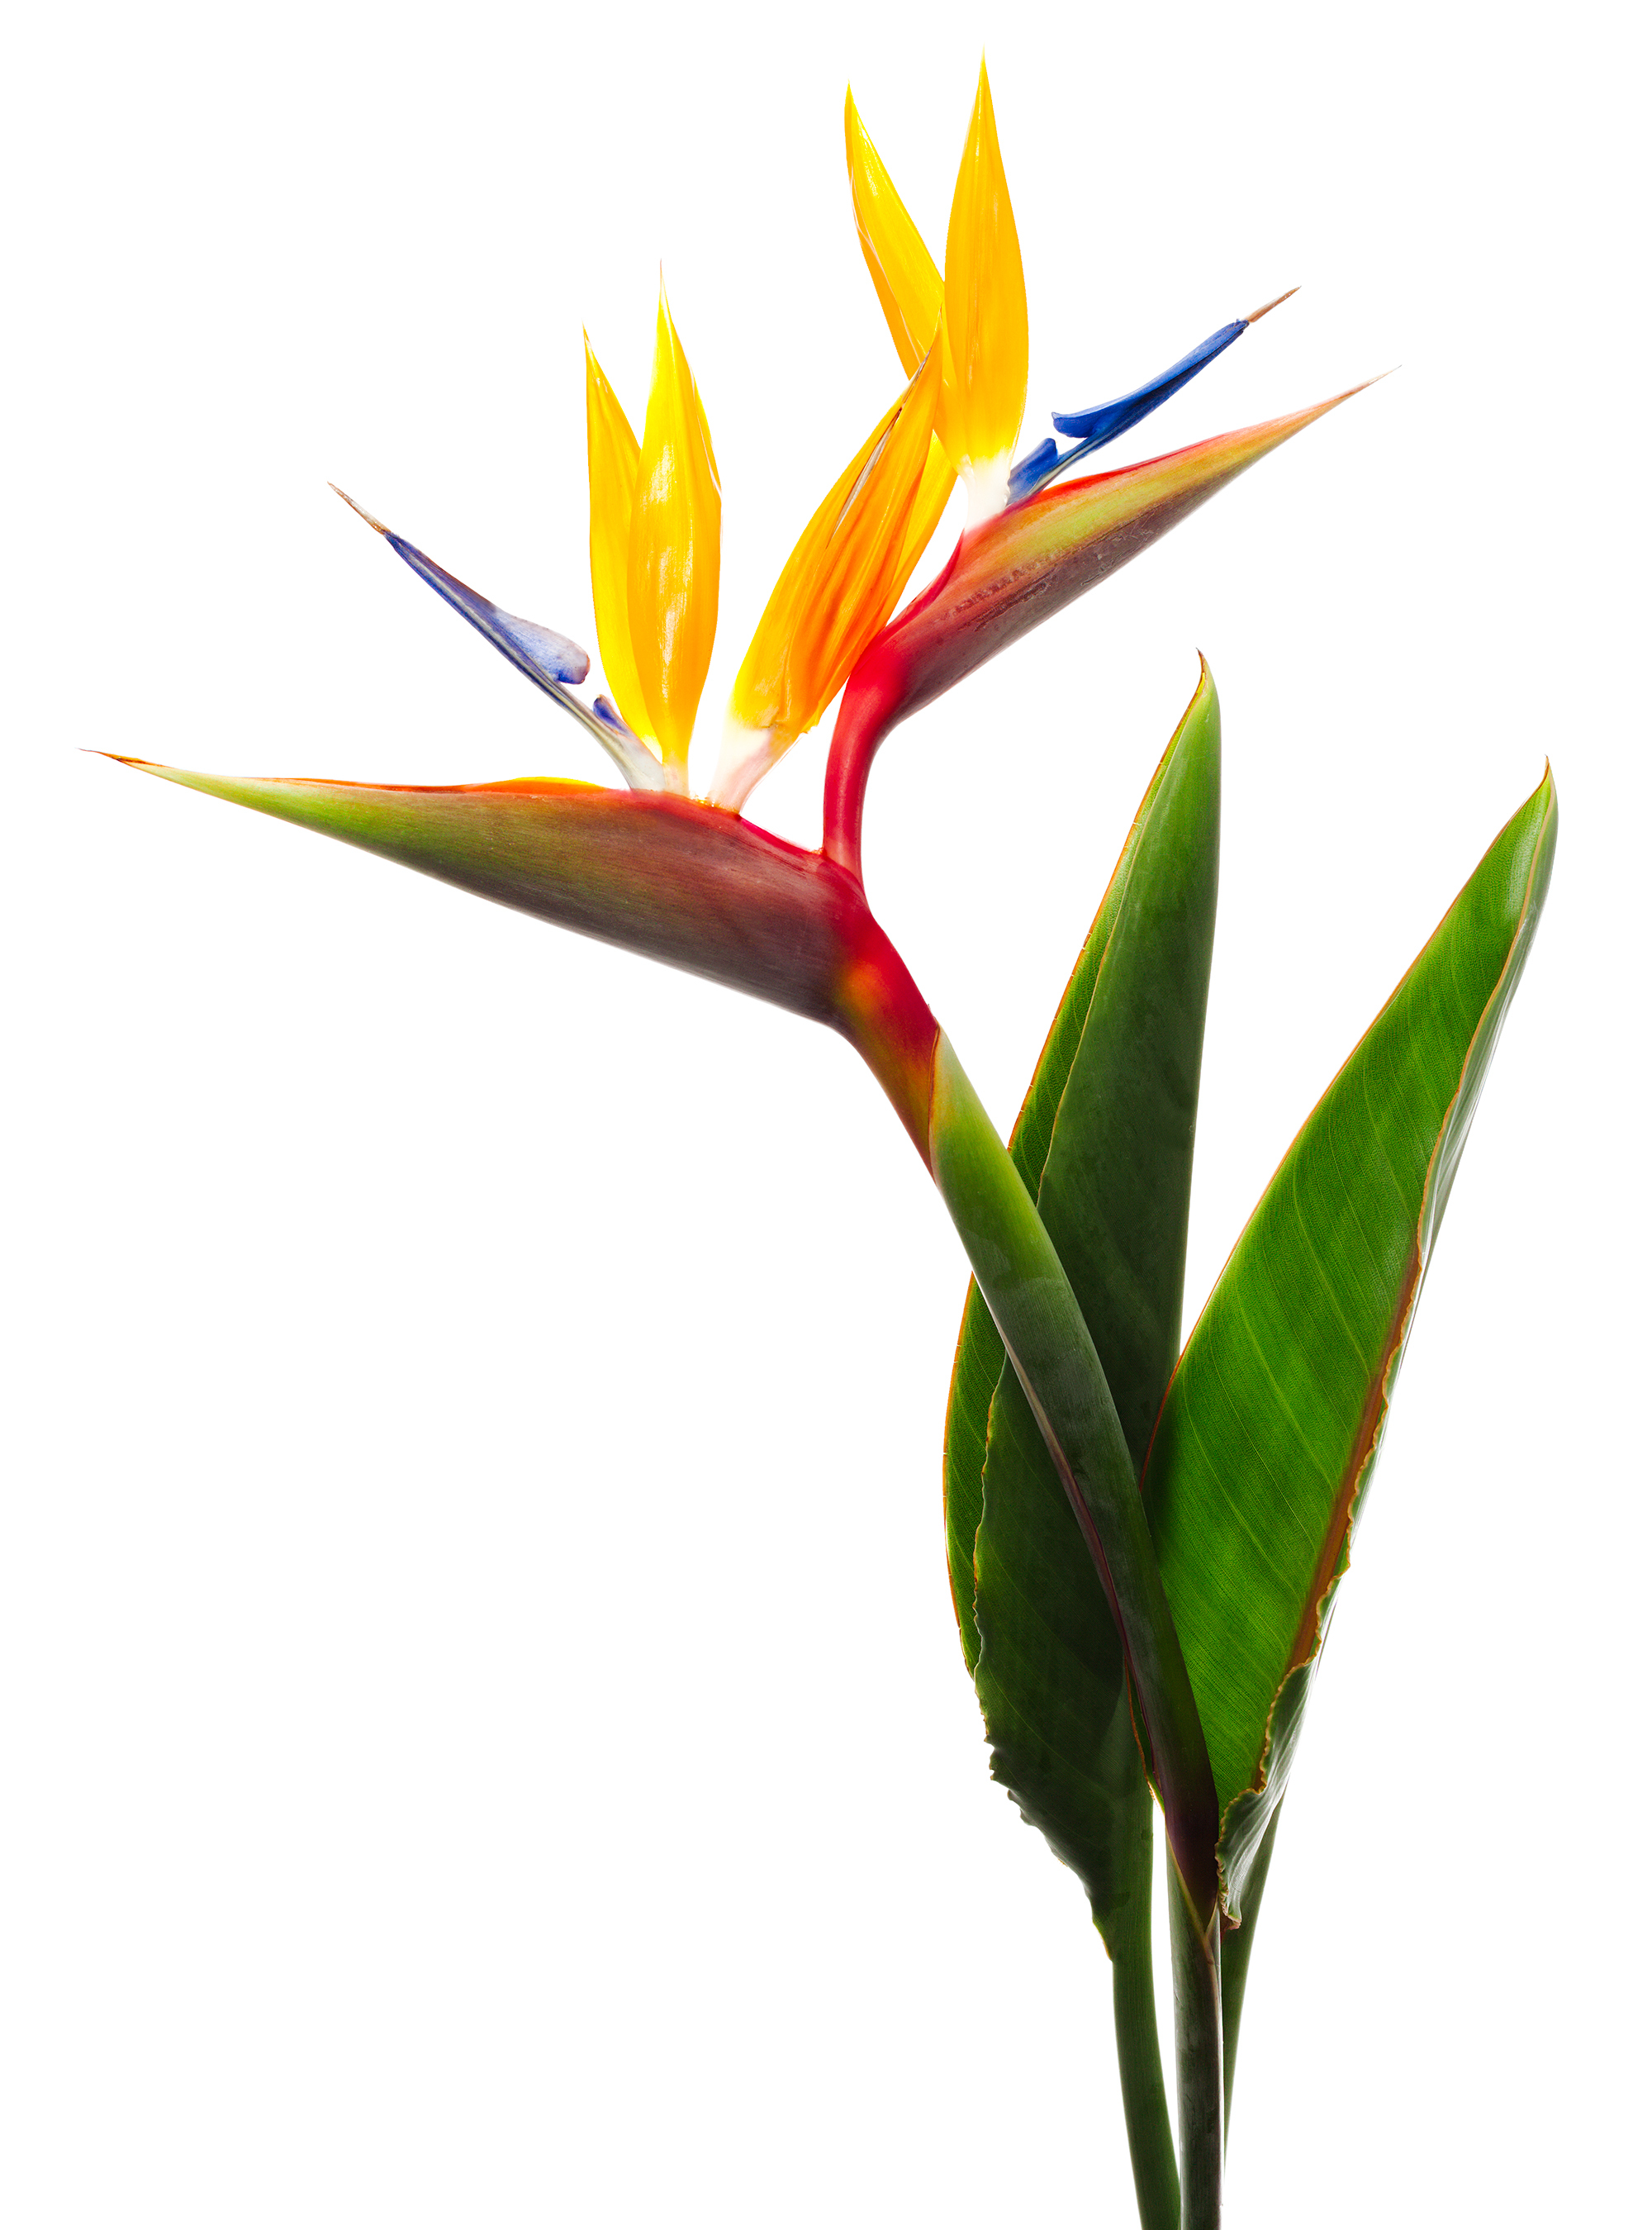 Bird of Paradise Flower, with red, yellow and blue tones against a white background.